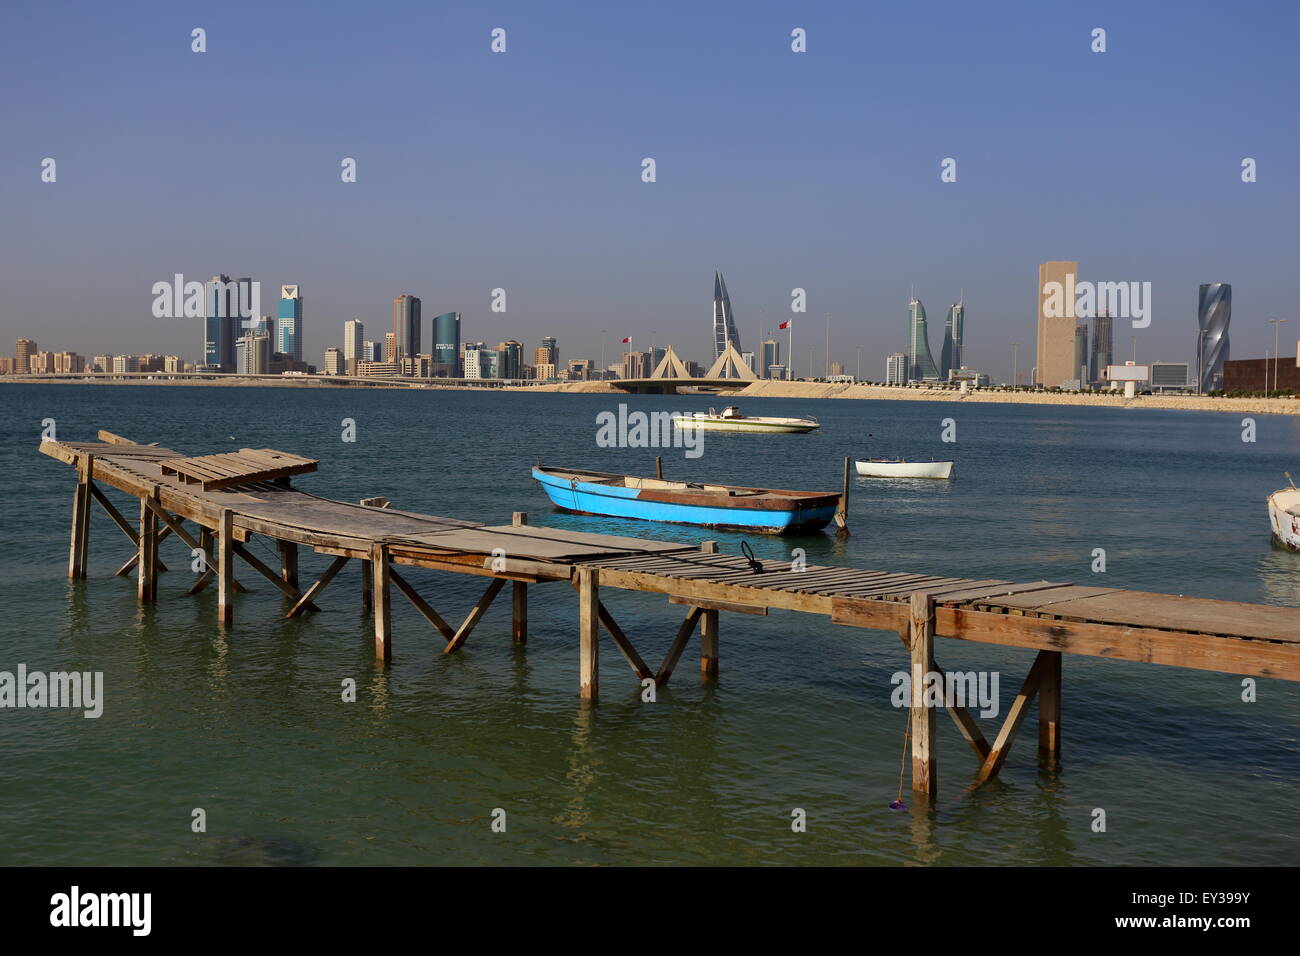 View of Manama from Muharraq with the Financial Harbor towers and World Trade Center in the distance, Kingdom of Bahrain Stock Photo